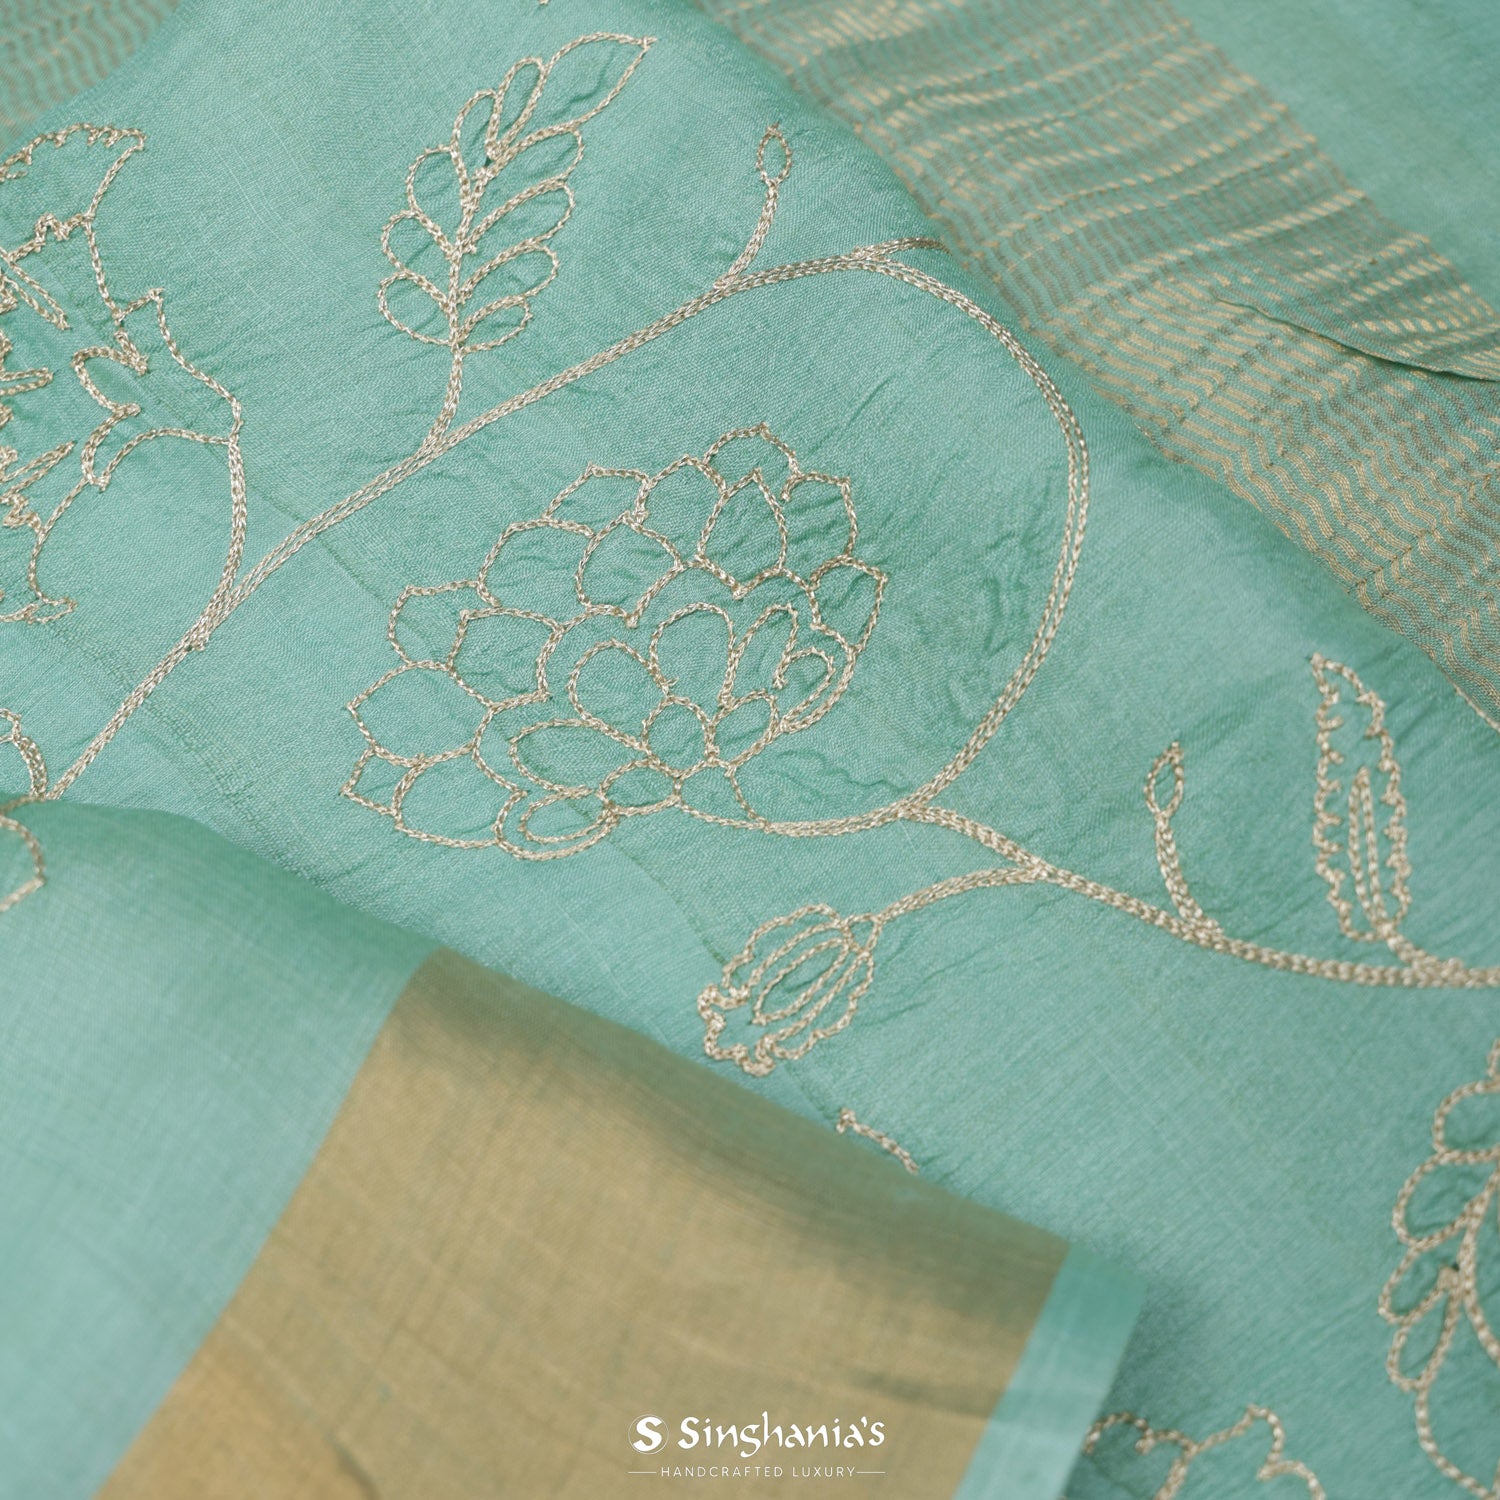 Tiffany Blue Tussar Saree With Floral Embroidery